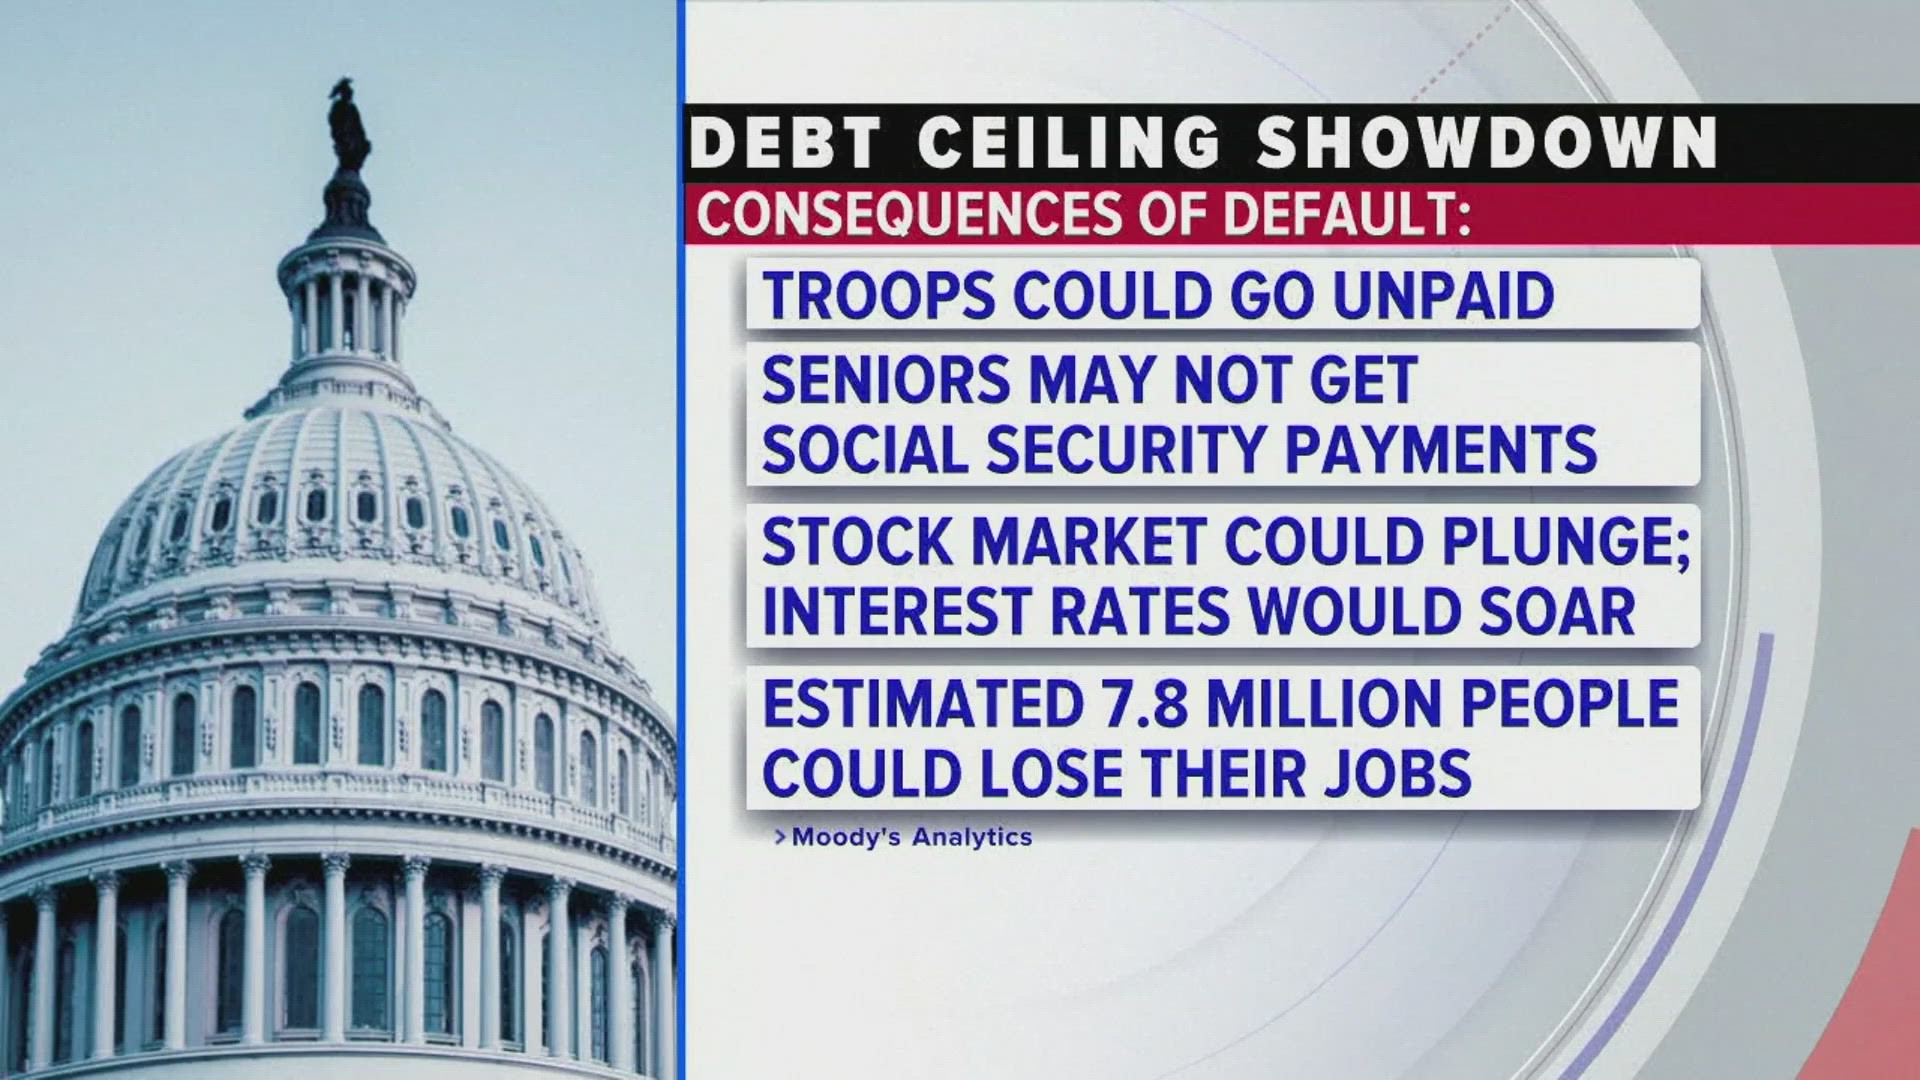 If Democrats and Republicans cannot agree on how to raise the debt ceiling, there are concerns many positions could be lost this summer.